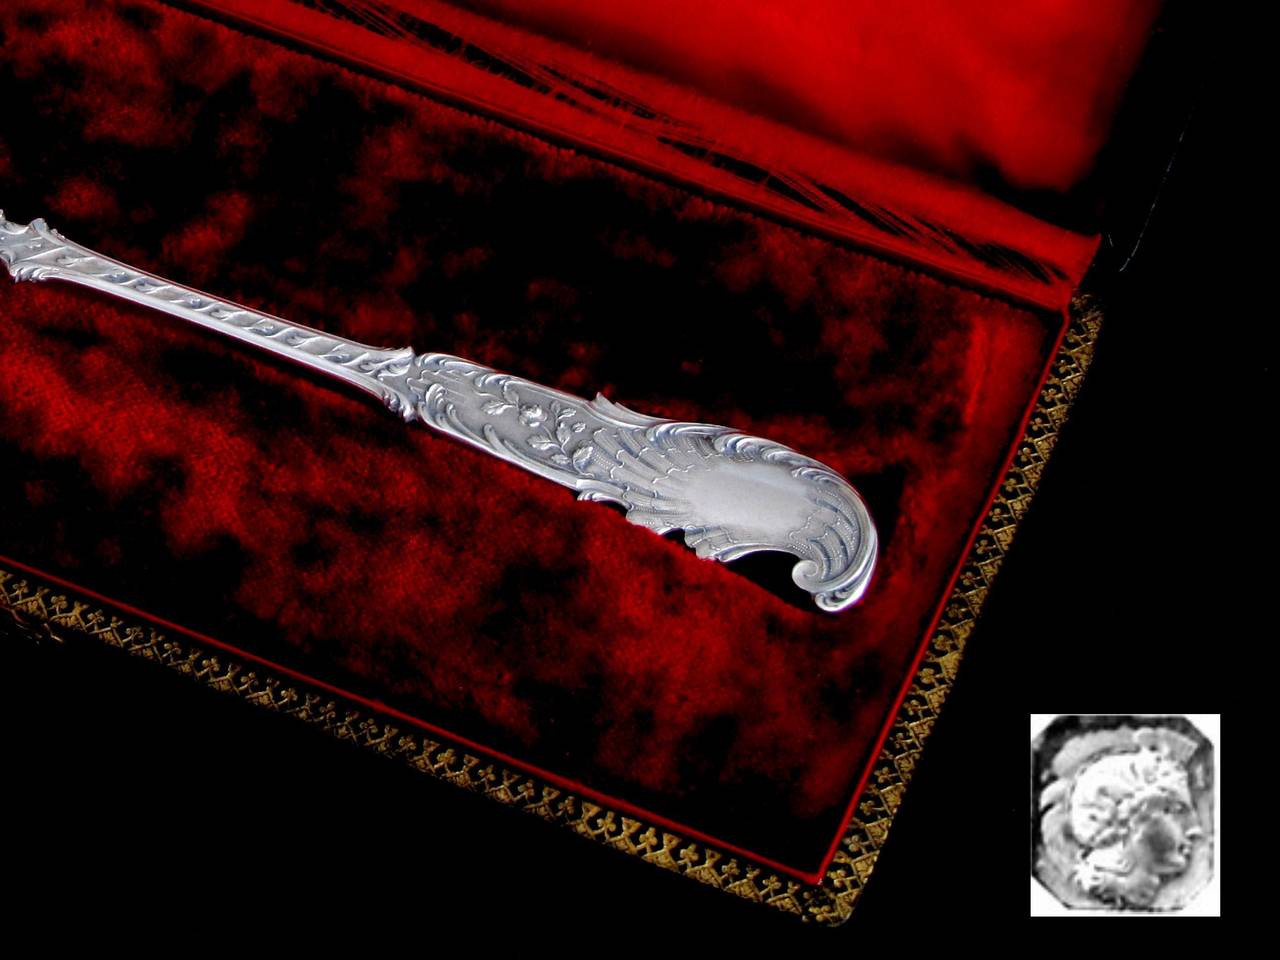 Coignet Fabulous French All Sterling Silver Strawberry Spoon with original box Rococo

Head of Minerve 1st titre for 950/1000 French Sterling Silver
A vermeil veil on the top. 

Prestigious Silversmith :
Louis Coignet
20 rue Barbette -